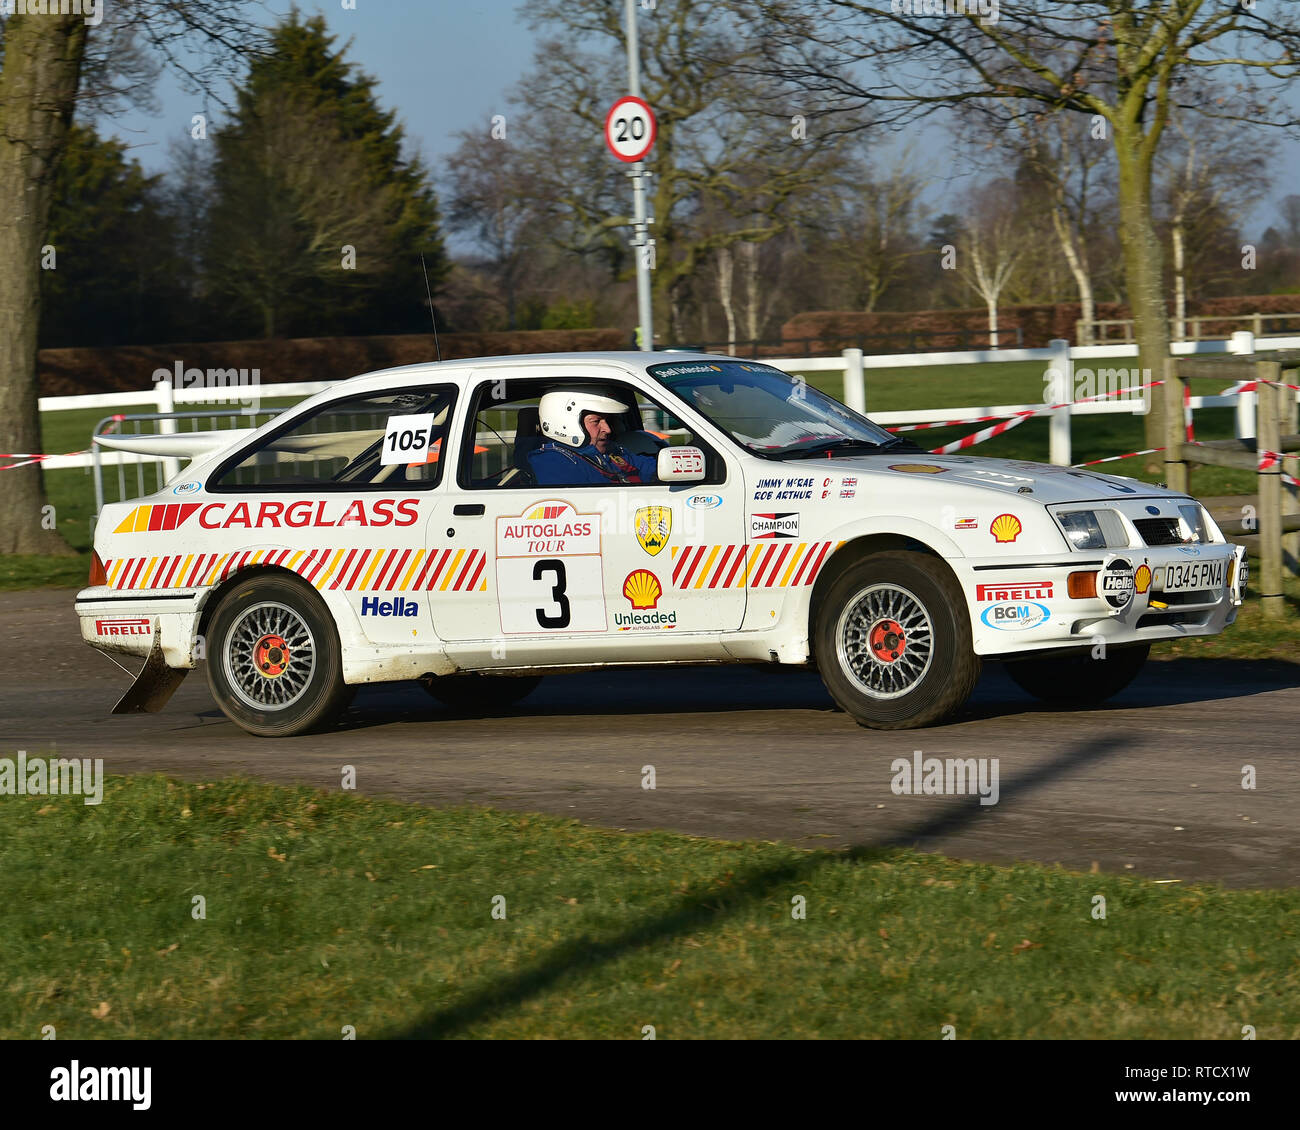 Ford Sierra RS Cosworth, Race Retro, Rally stage, Sunday 24th February, 2019, retro, nostalgia, motorsport, cars, vehicles, racing, classic cars, hist Stock Photo